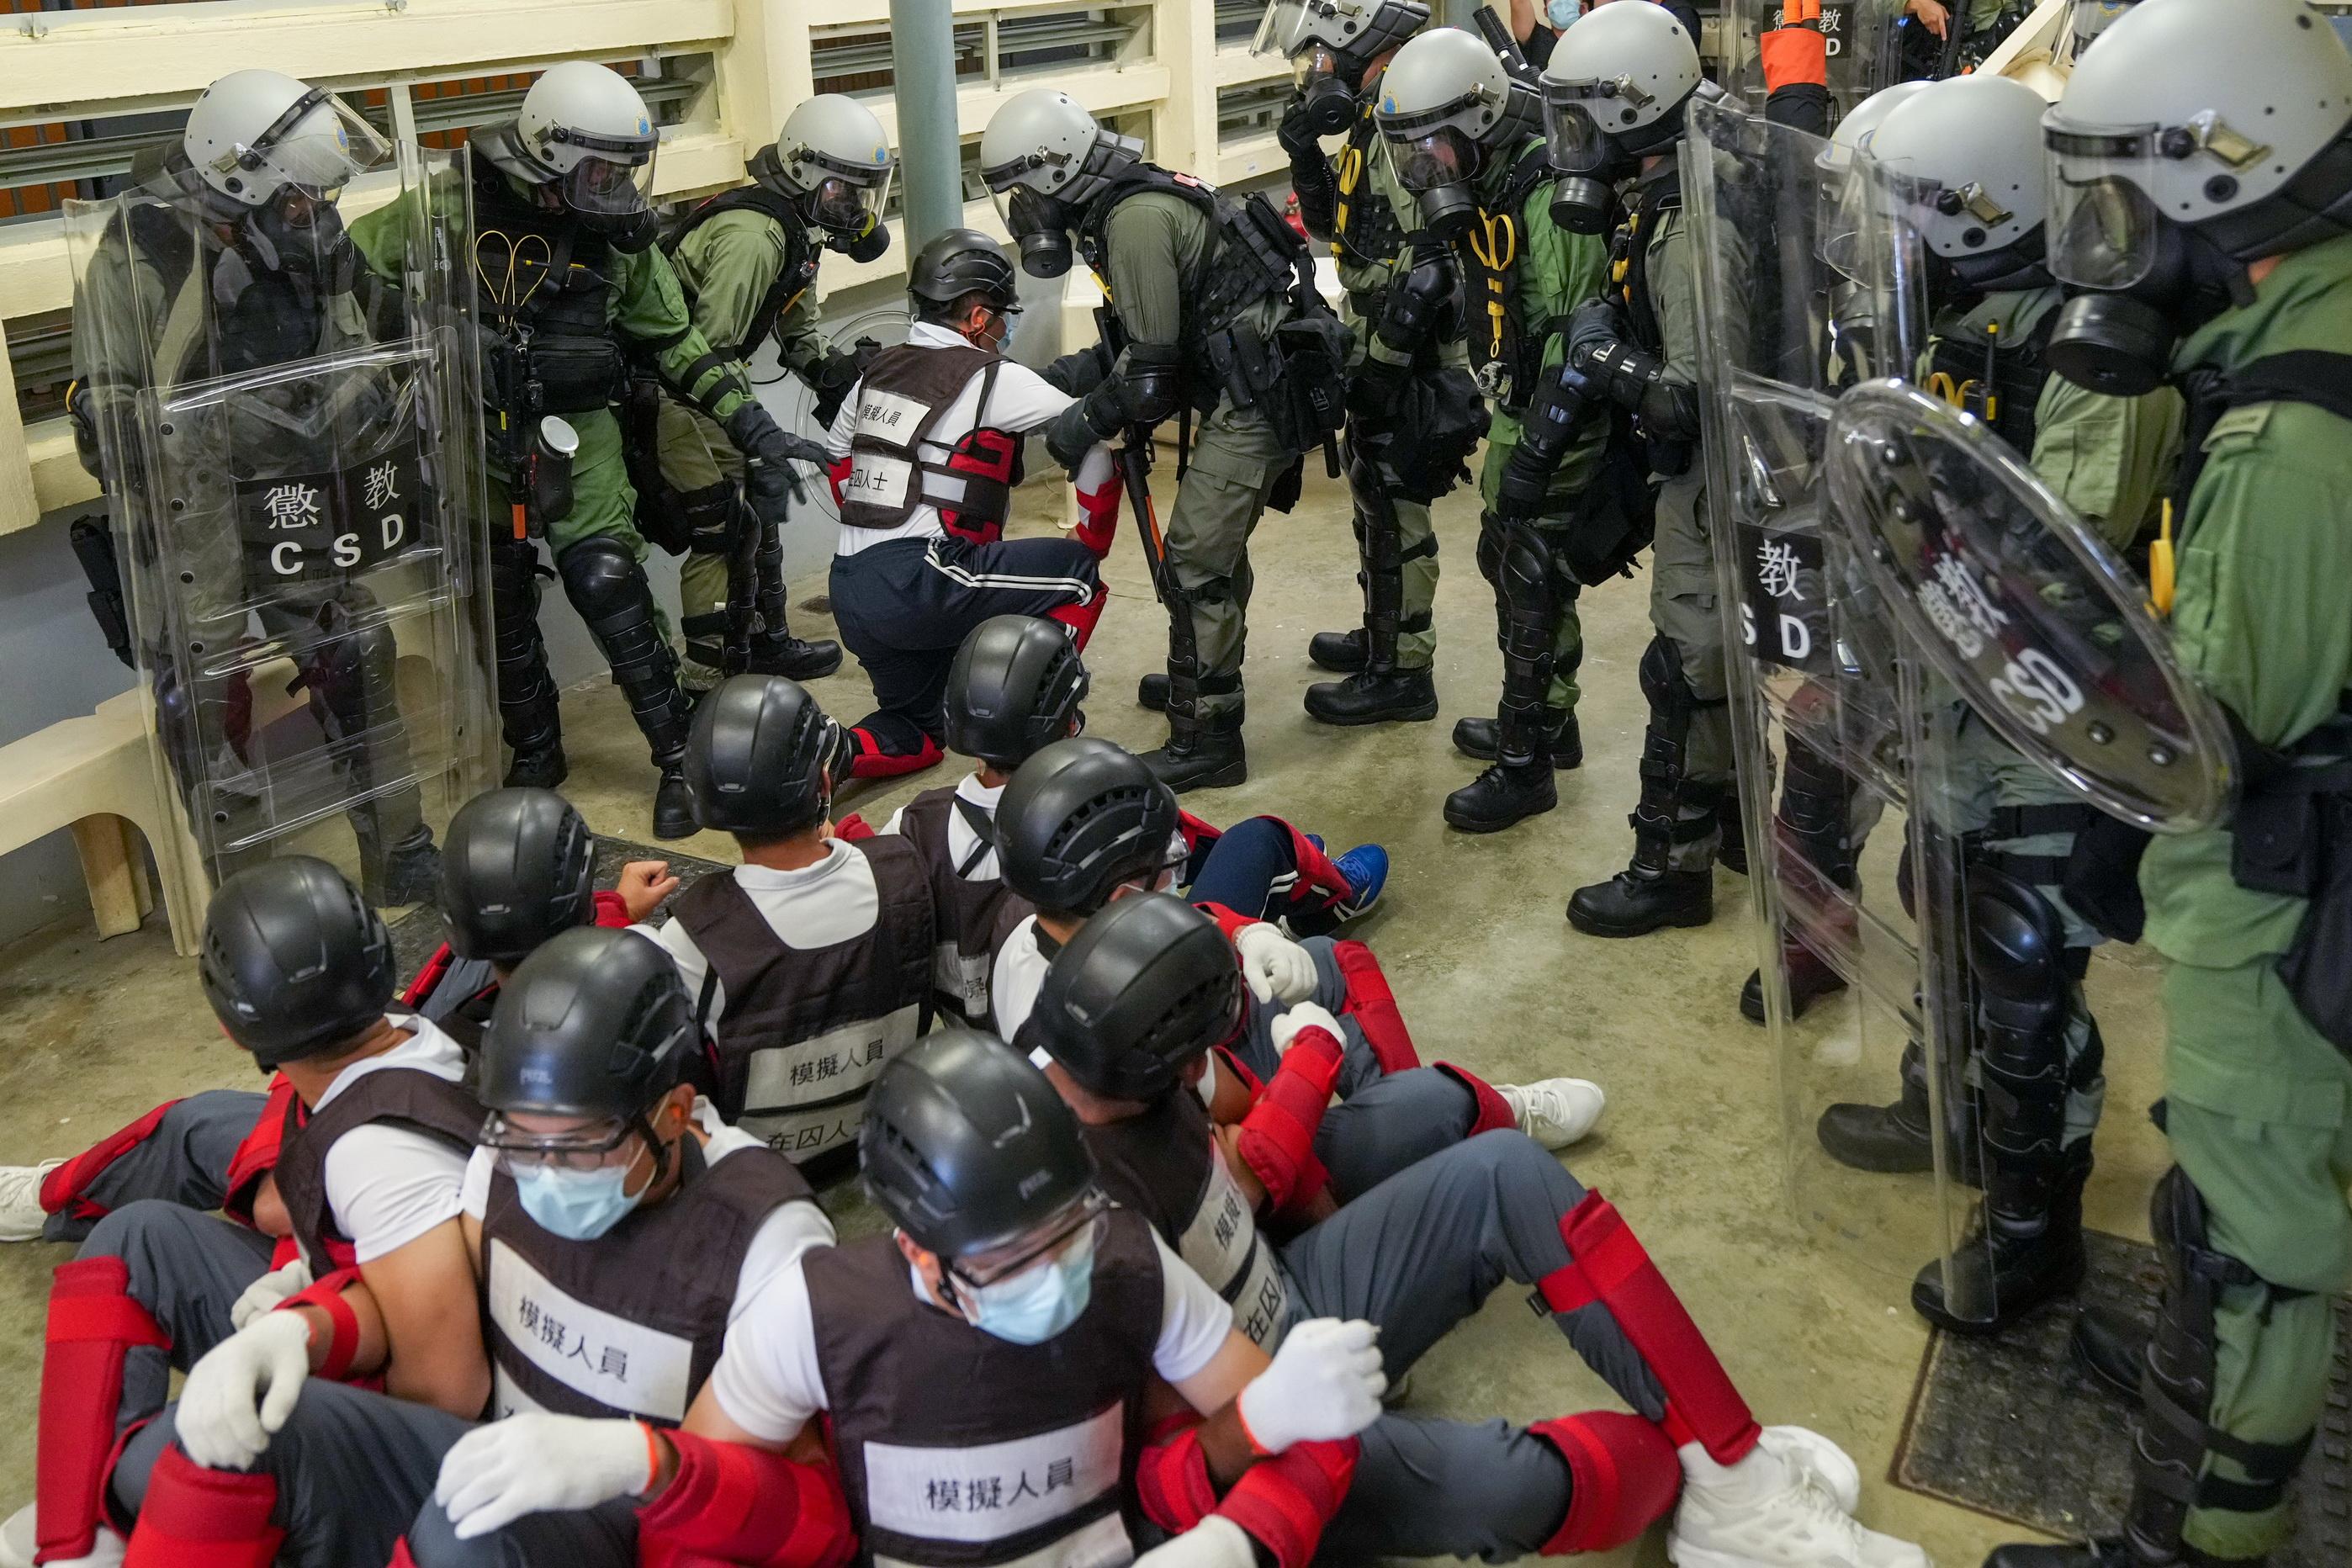 The Correctional Services Department conducted an emergency exercise, code-named Concord XXI, today (November 30) to test the emergency response of its various units in different scenarios including mass indiscipline of persons in custody, a hostage-taking situation and members of the public attempting to damage correctional facilities at Sha Tsui Correctional Institution. Photo shows the Correctional Emergency Response Team successfully controlling an incident of mass indiscipline of persons in custody.